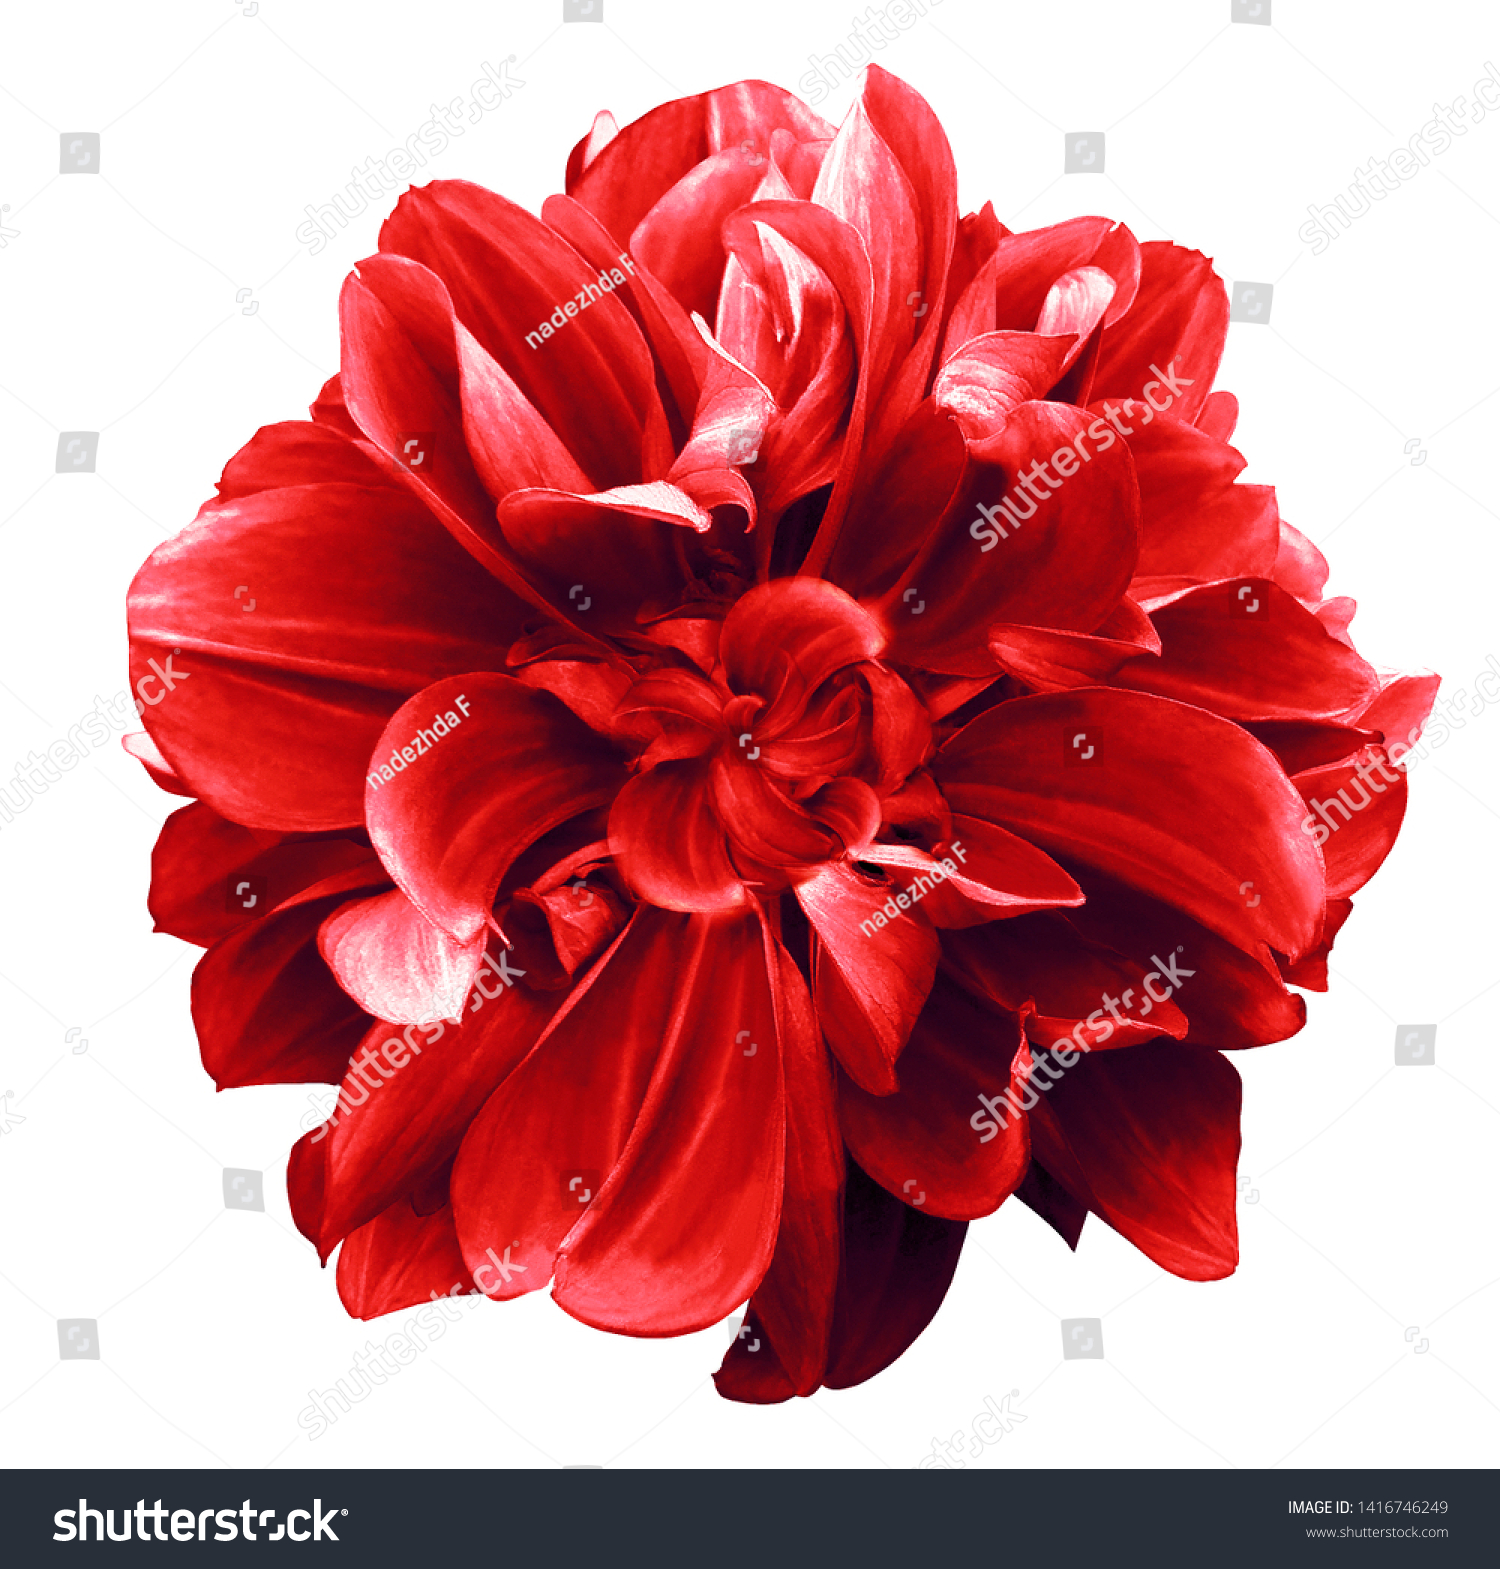 red  dahlia. Flower on the black isolated background with clipping path.  For design.  Closeup.  Nature.  #1416746249